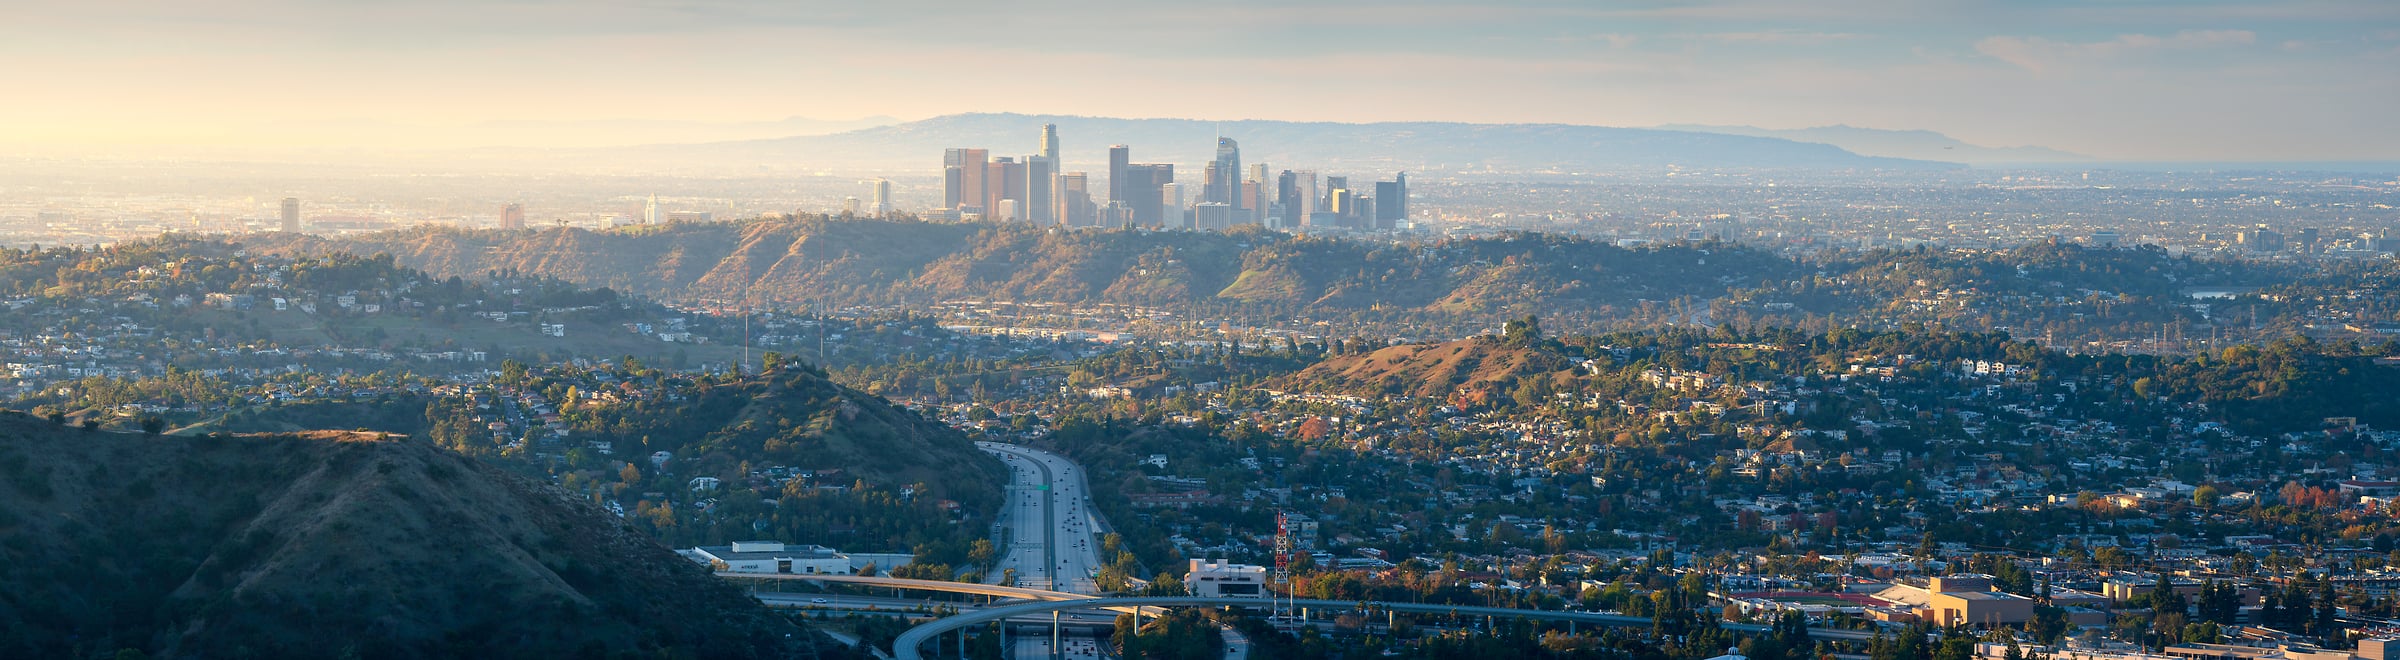 317 megapixels! A very high resolution, large-format panorama photo print of the Los Angeles, California skyline; cityscape photograph created by Jeff Lewis in Los Angeles, California.